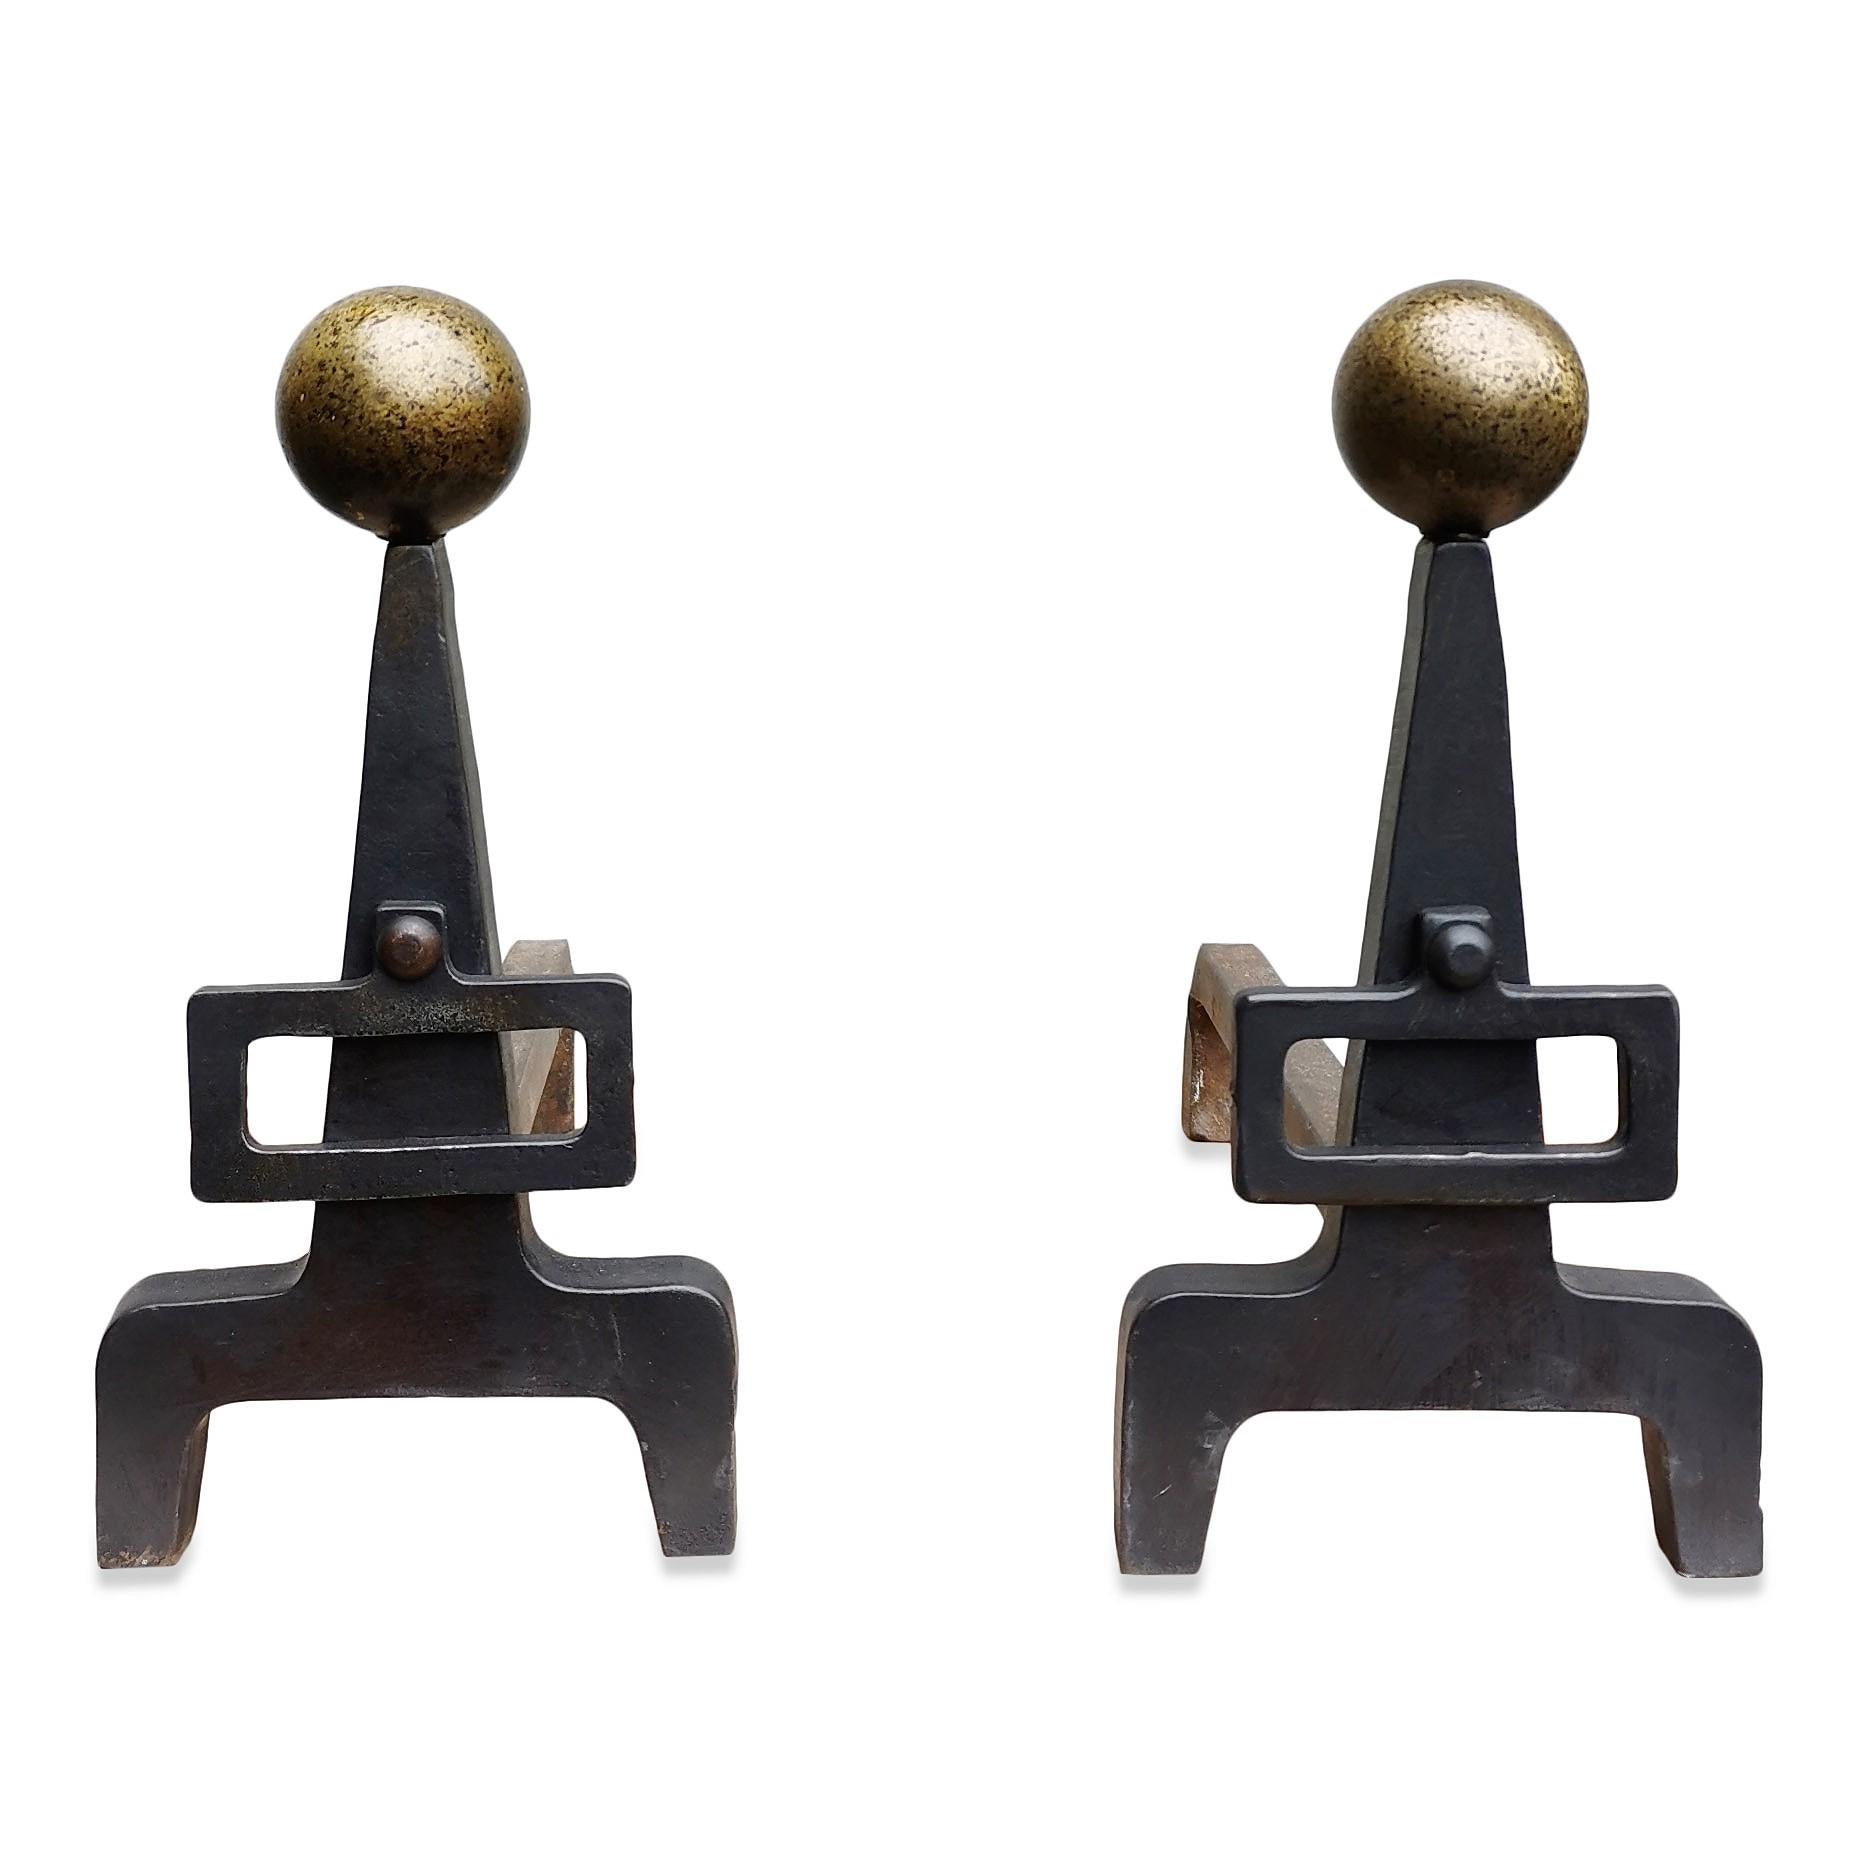 Modernist wrought iron andirons with buckle
Hammered brass balls on top of each andiron.